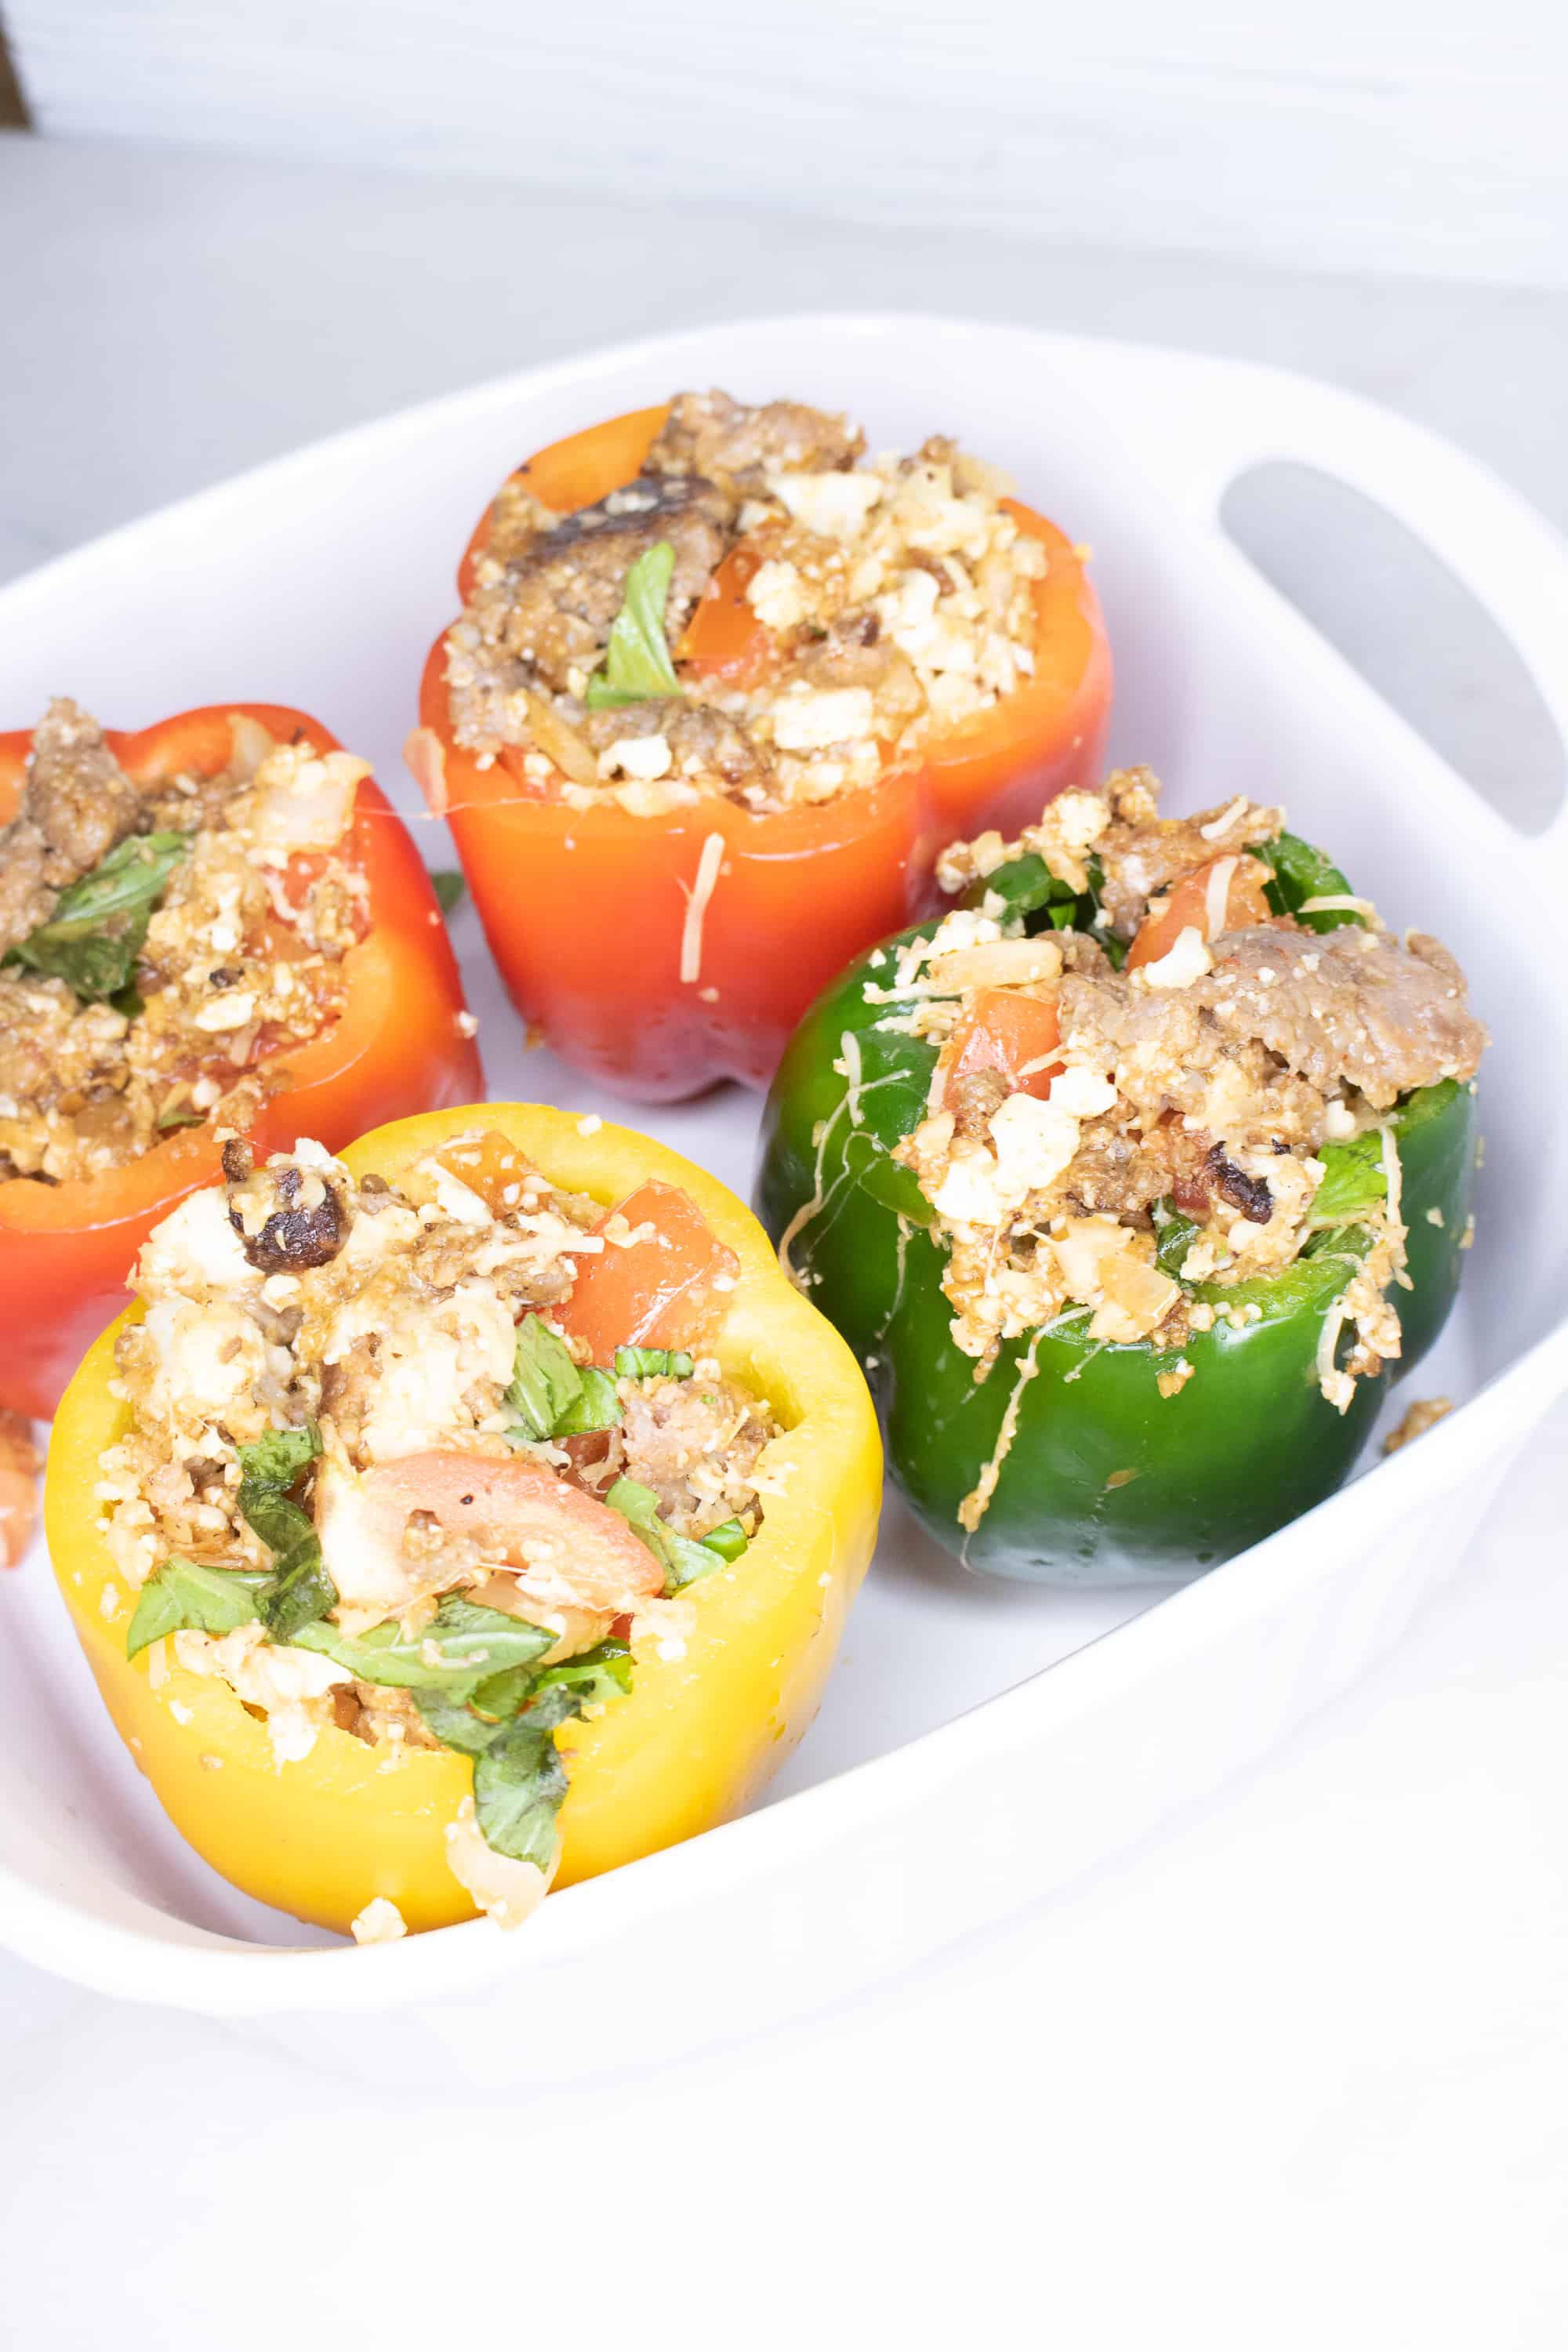 Italian sausage and cauliflower rice stuffed peppers in a white serving dish